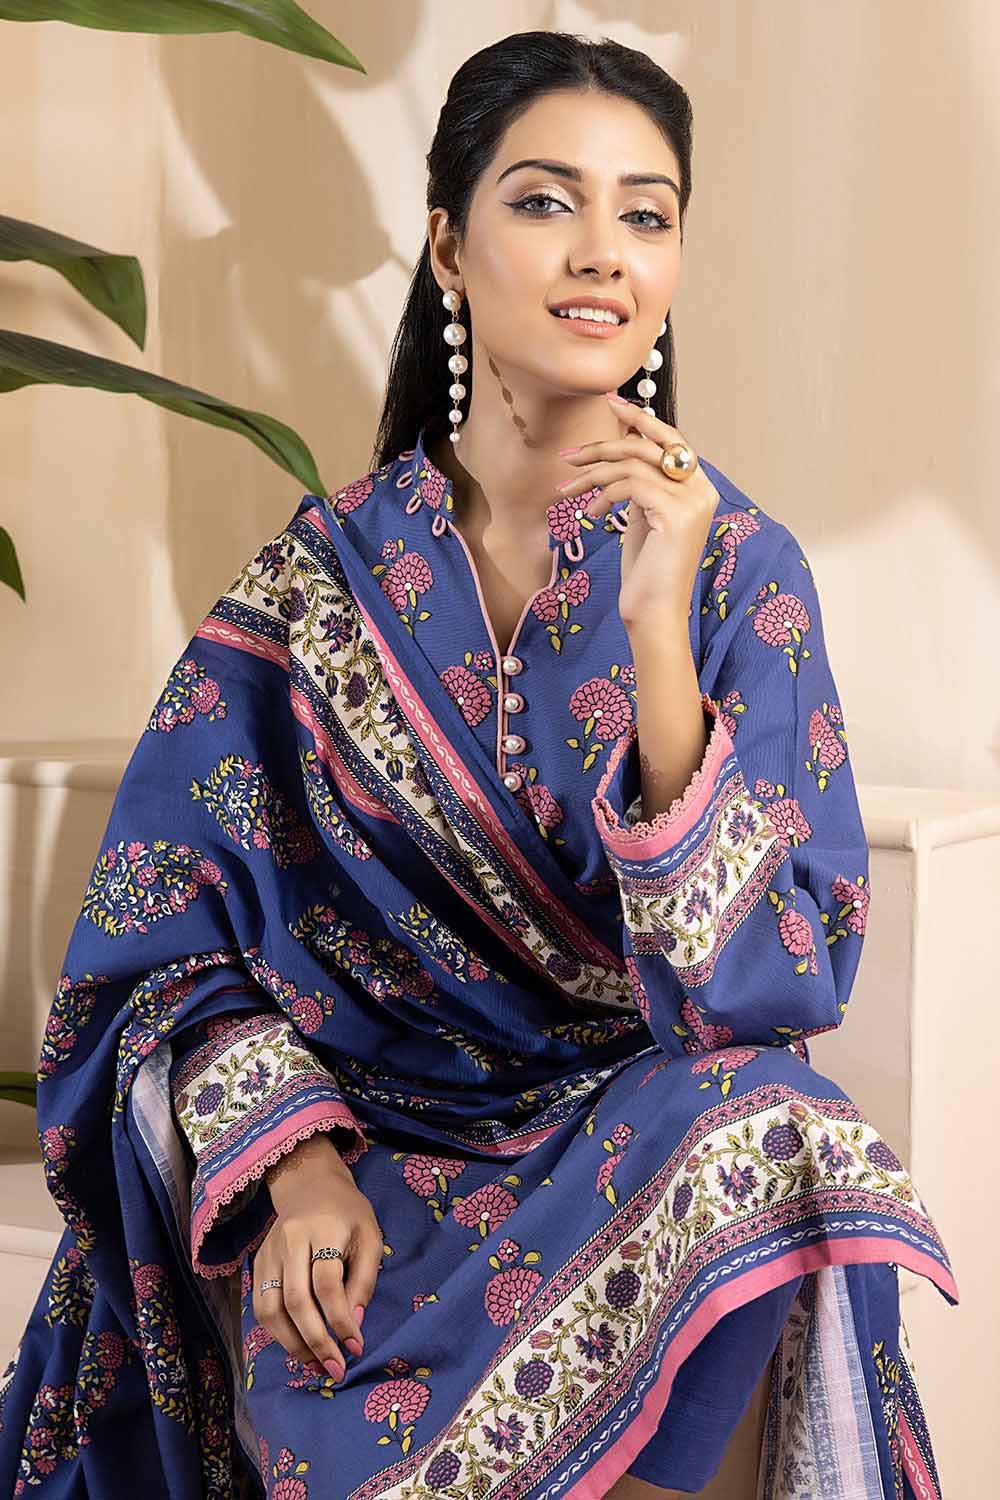 Gul Ahmed 3PC Khaddar Stitched Printed Suit K-22078 A